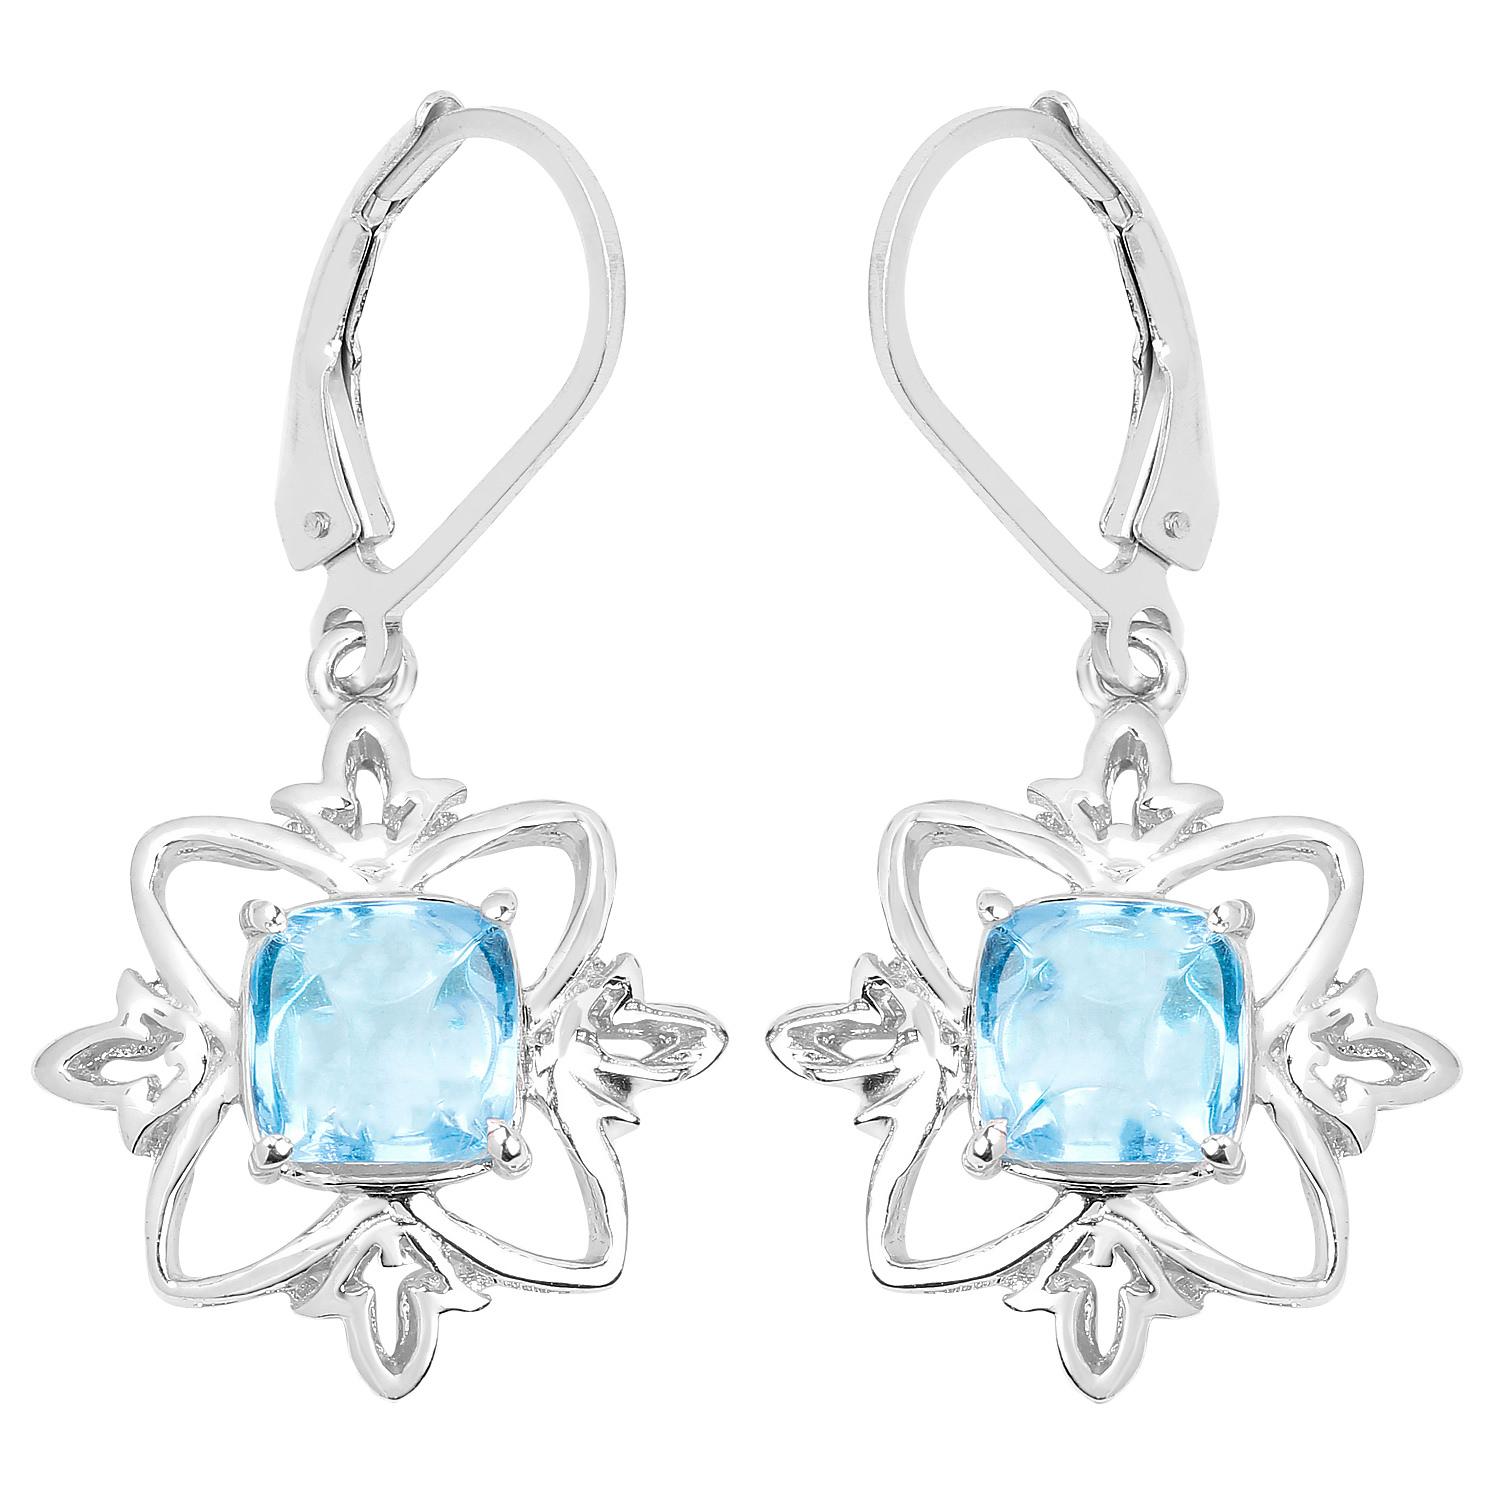 Mixed Cut Swiss Blue Topaz Dangle Earrings 5.3 Carats Rhodium Plated Silver For Sale